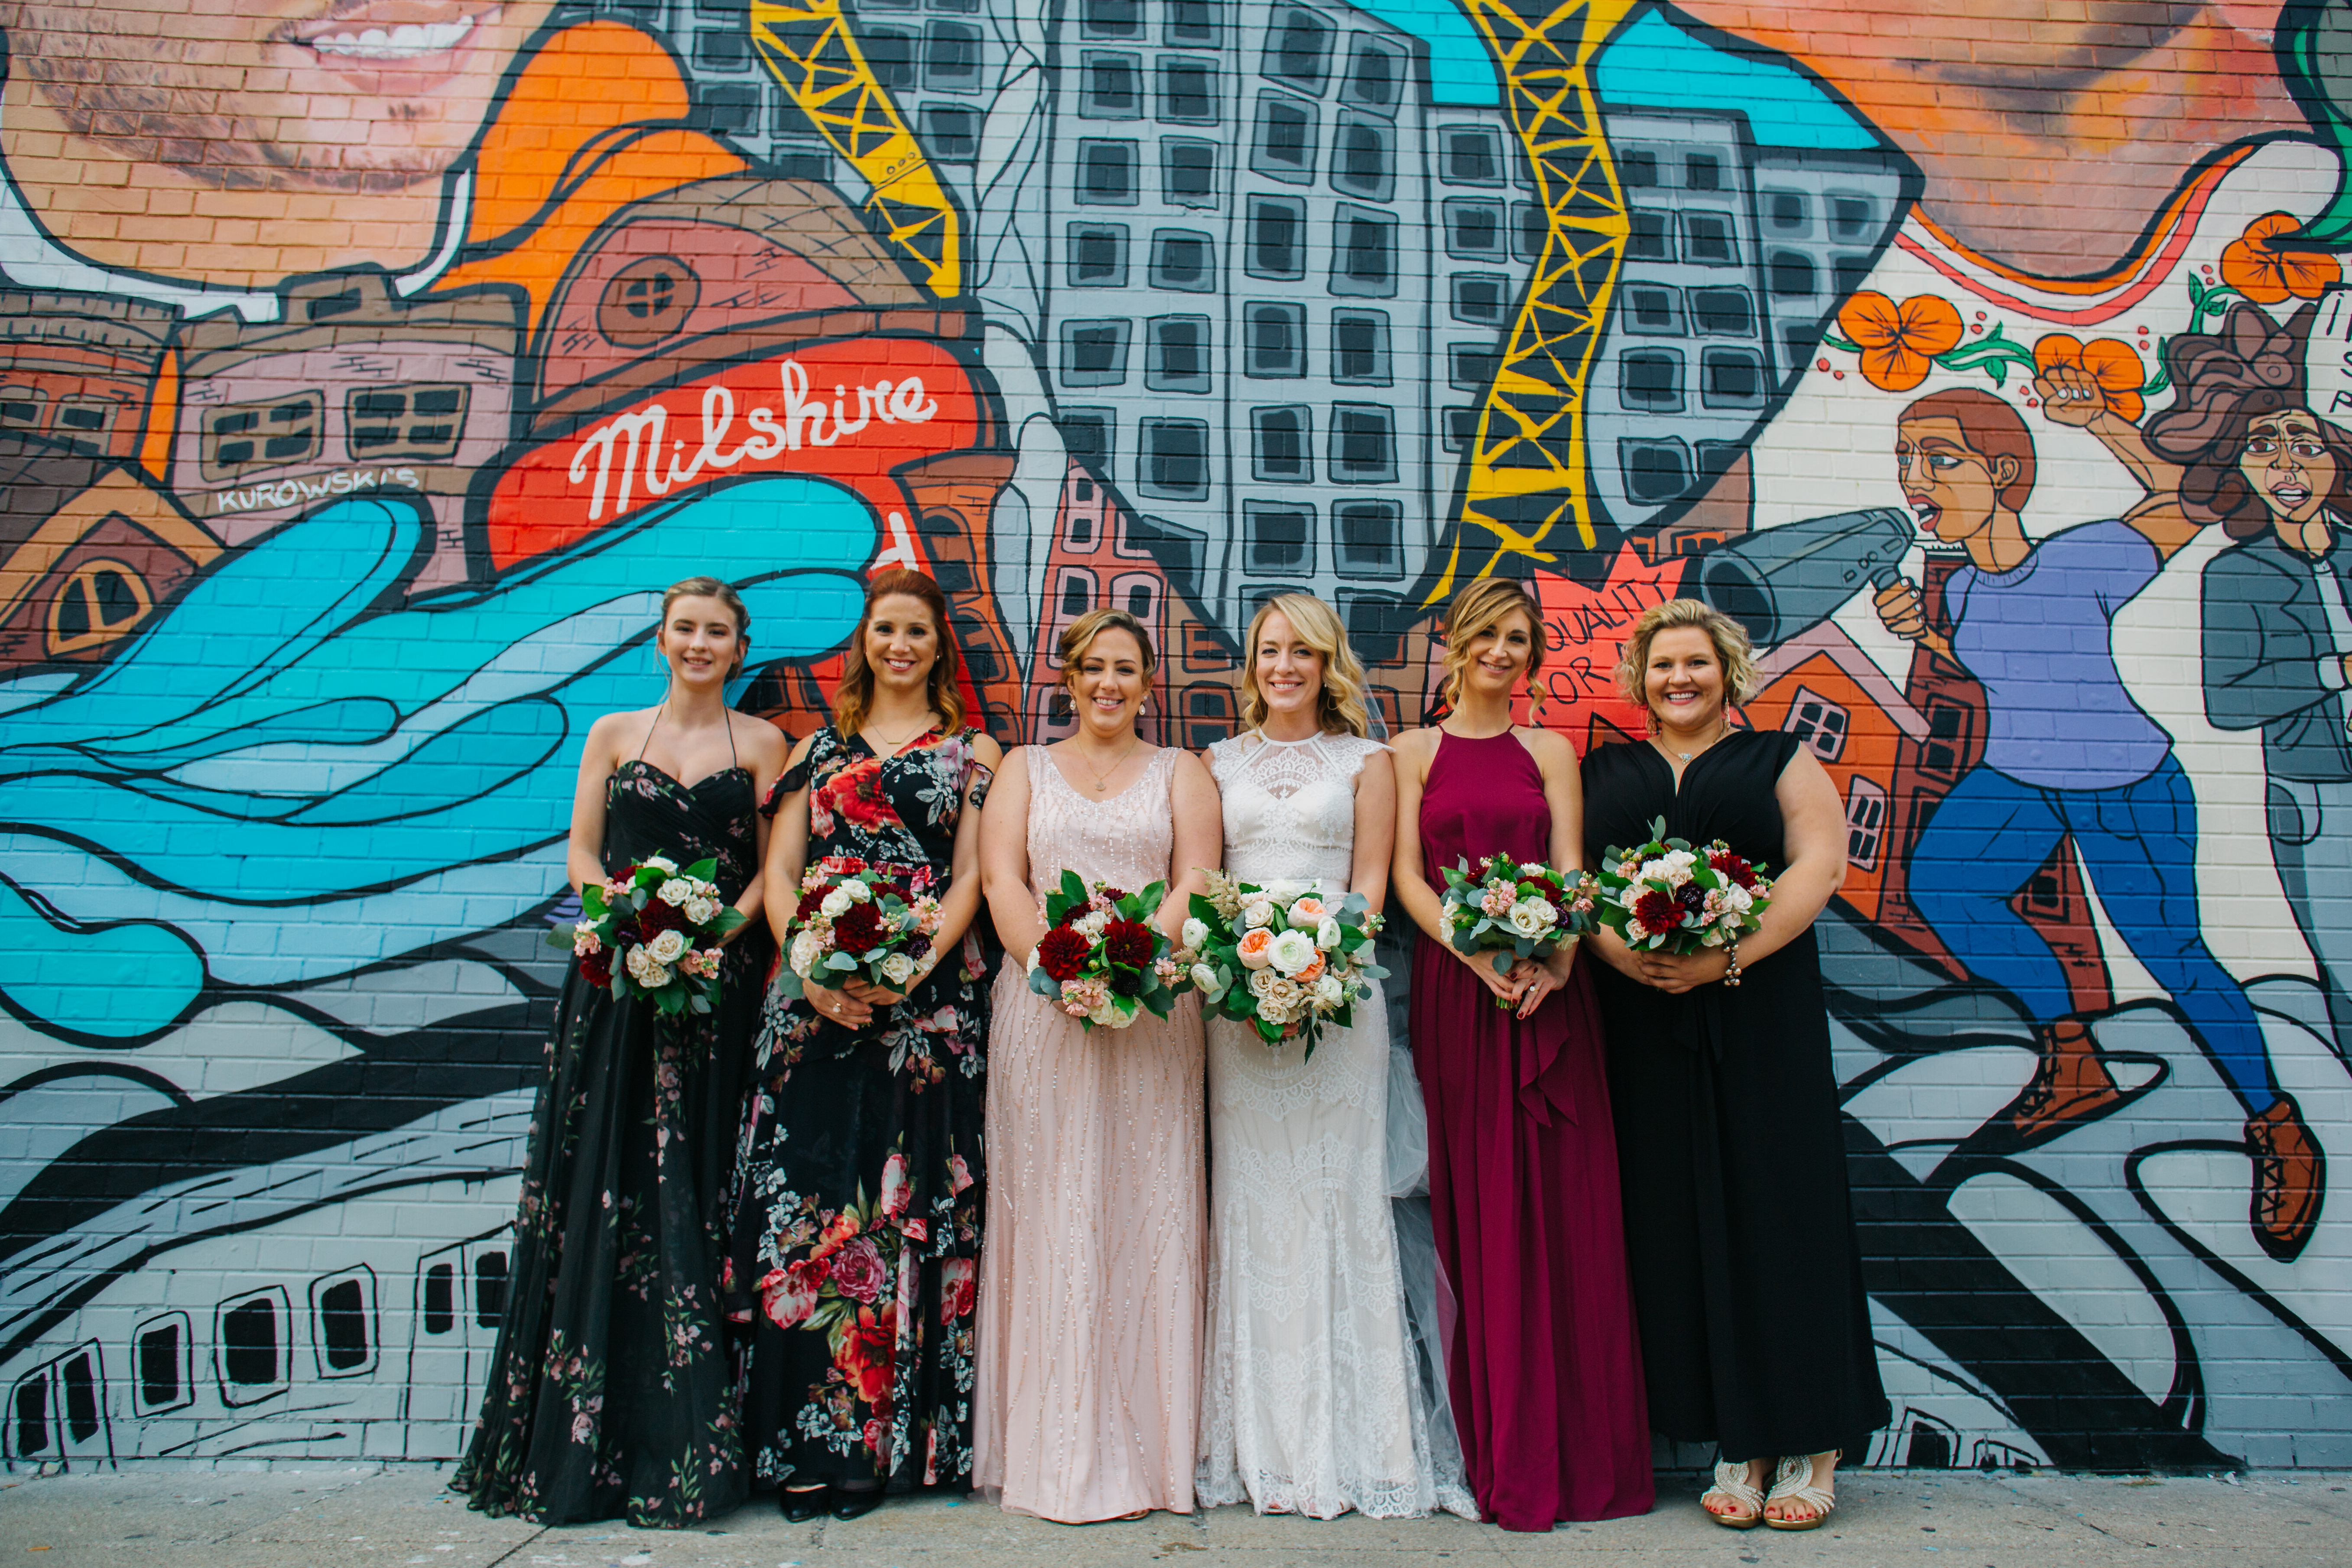 Chicago bridal party with bouquets of garden roses, burgundy dahlias, white ranunculus, astilbe, and pink stock.